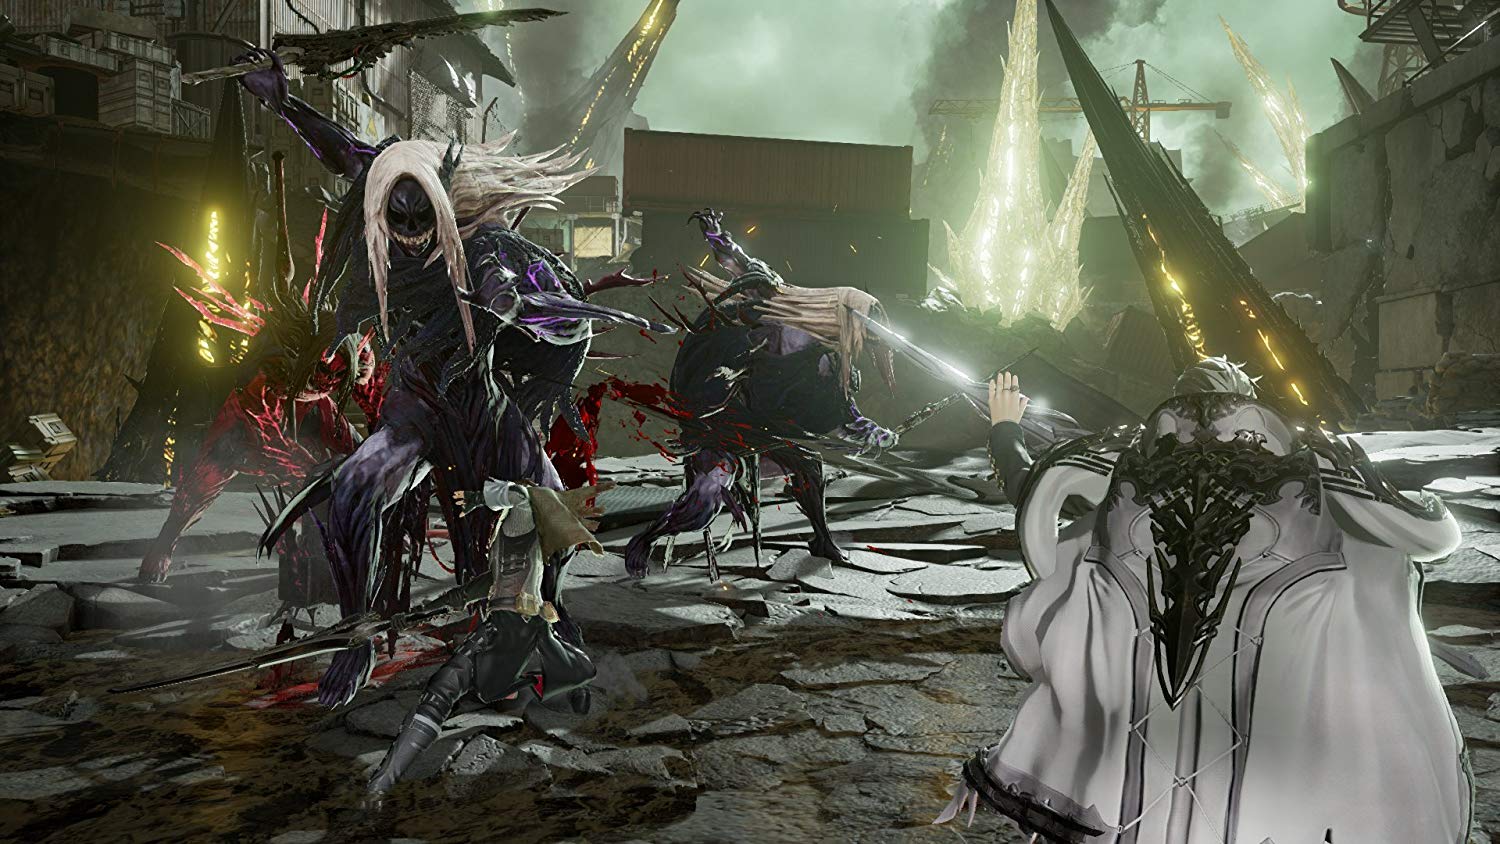 Code Vein (Bloodthirst Edition) (Limited Edition) - (PS4) PlayStation 4 (Japanese Import) Video Games Bandai Namco   